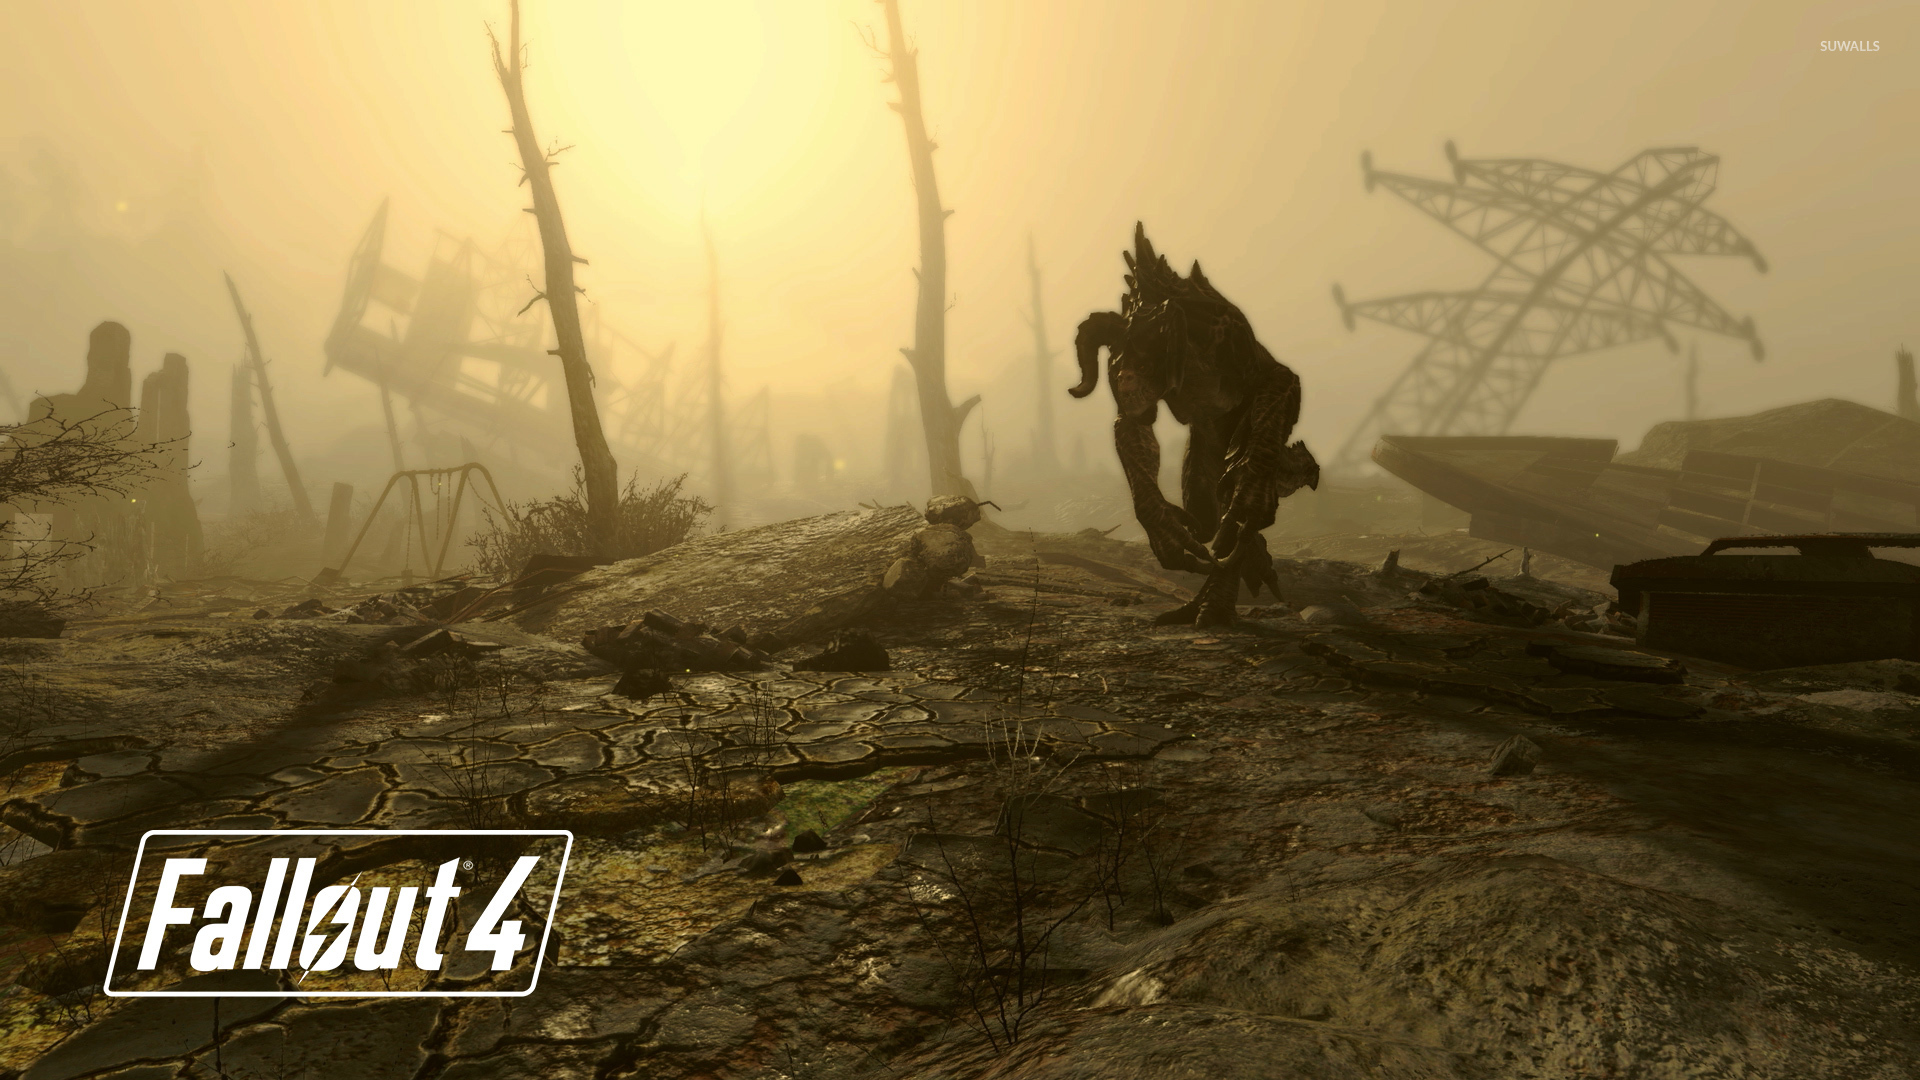 Deathclaw In Fallout 4 Wallpaper - Fallout 4 Wallpaper Deathclaw , HD Wallpaper & Backgrounds